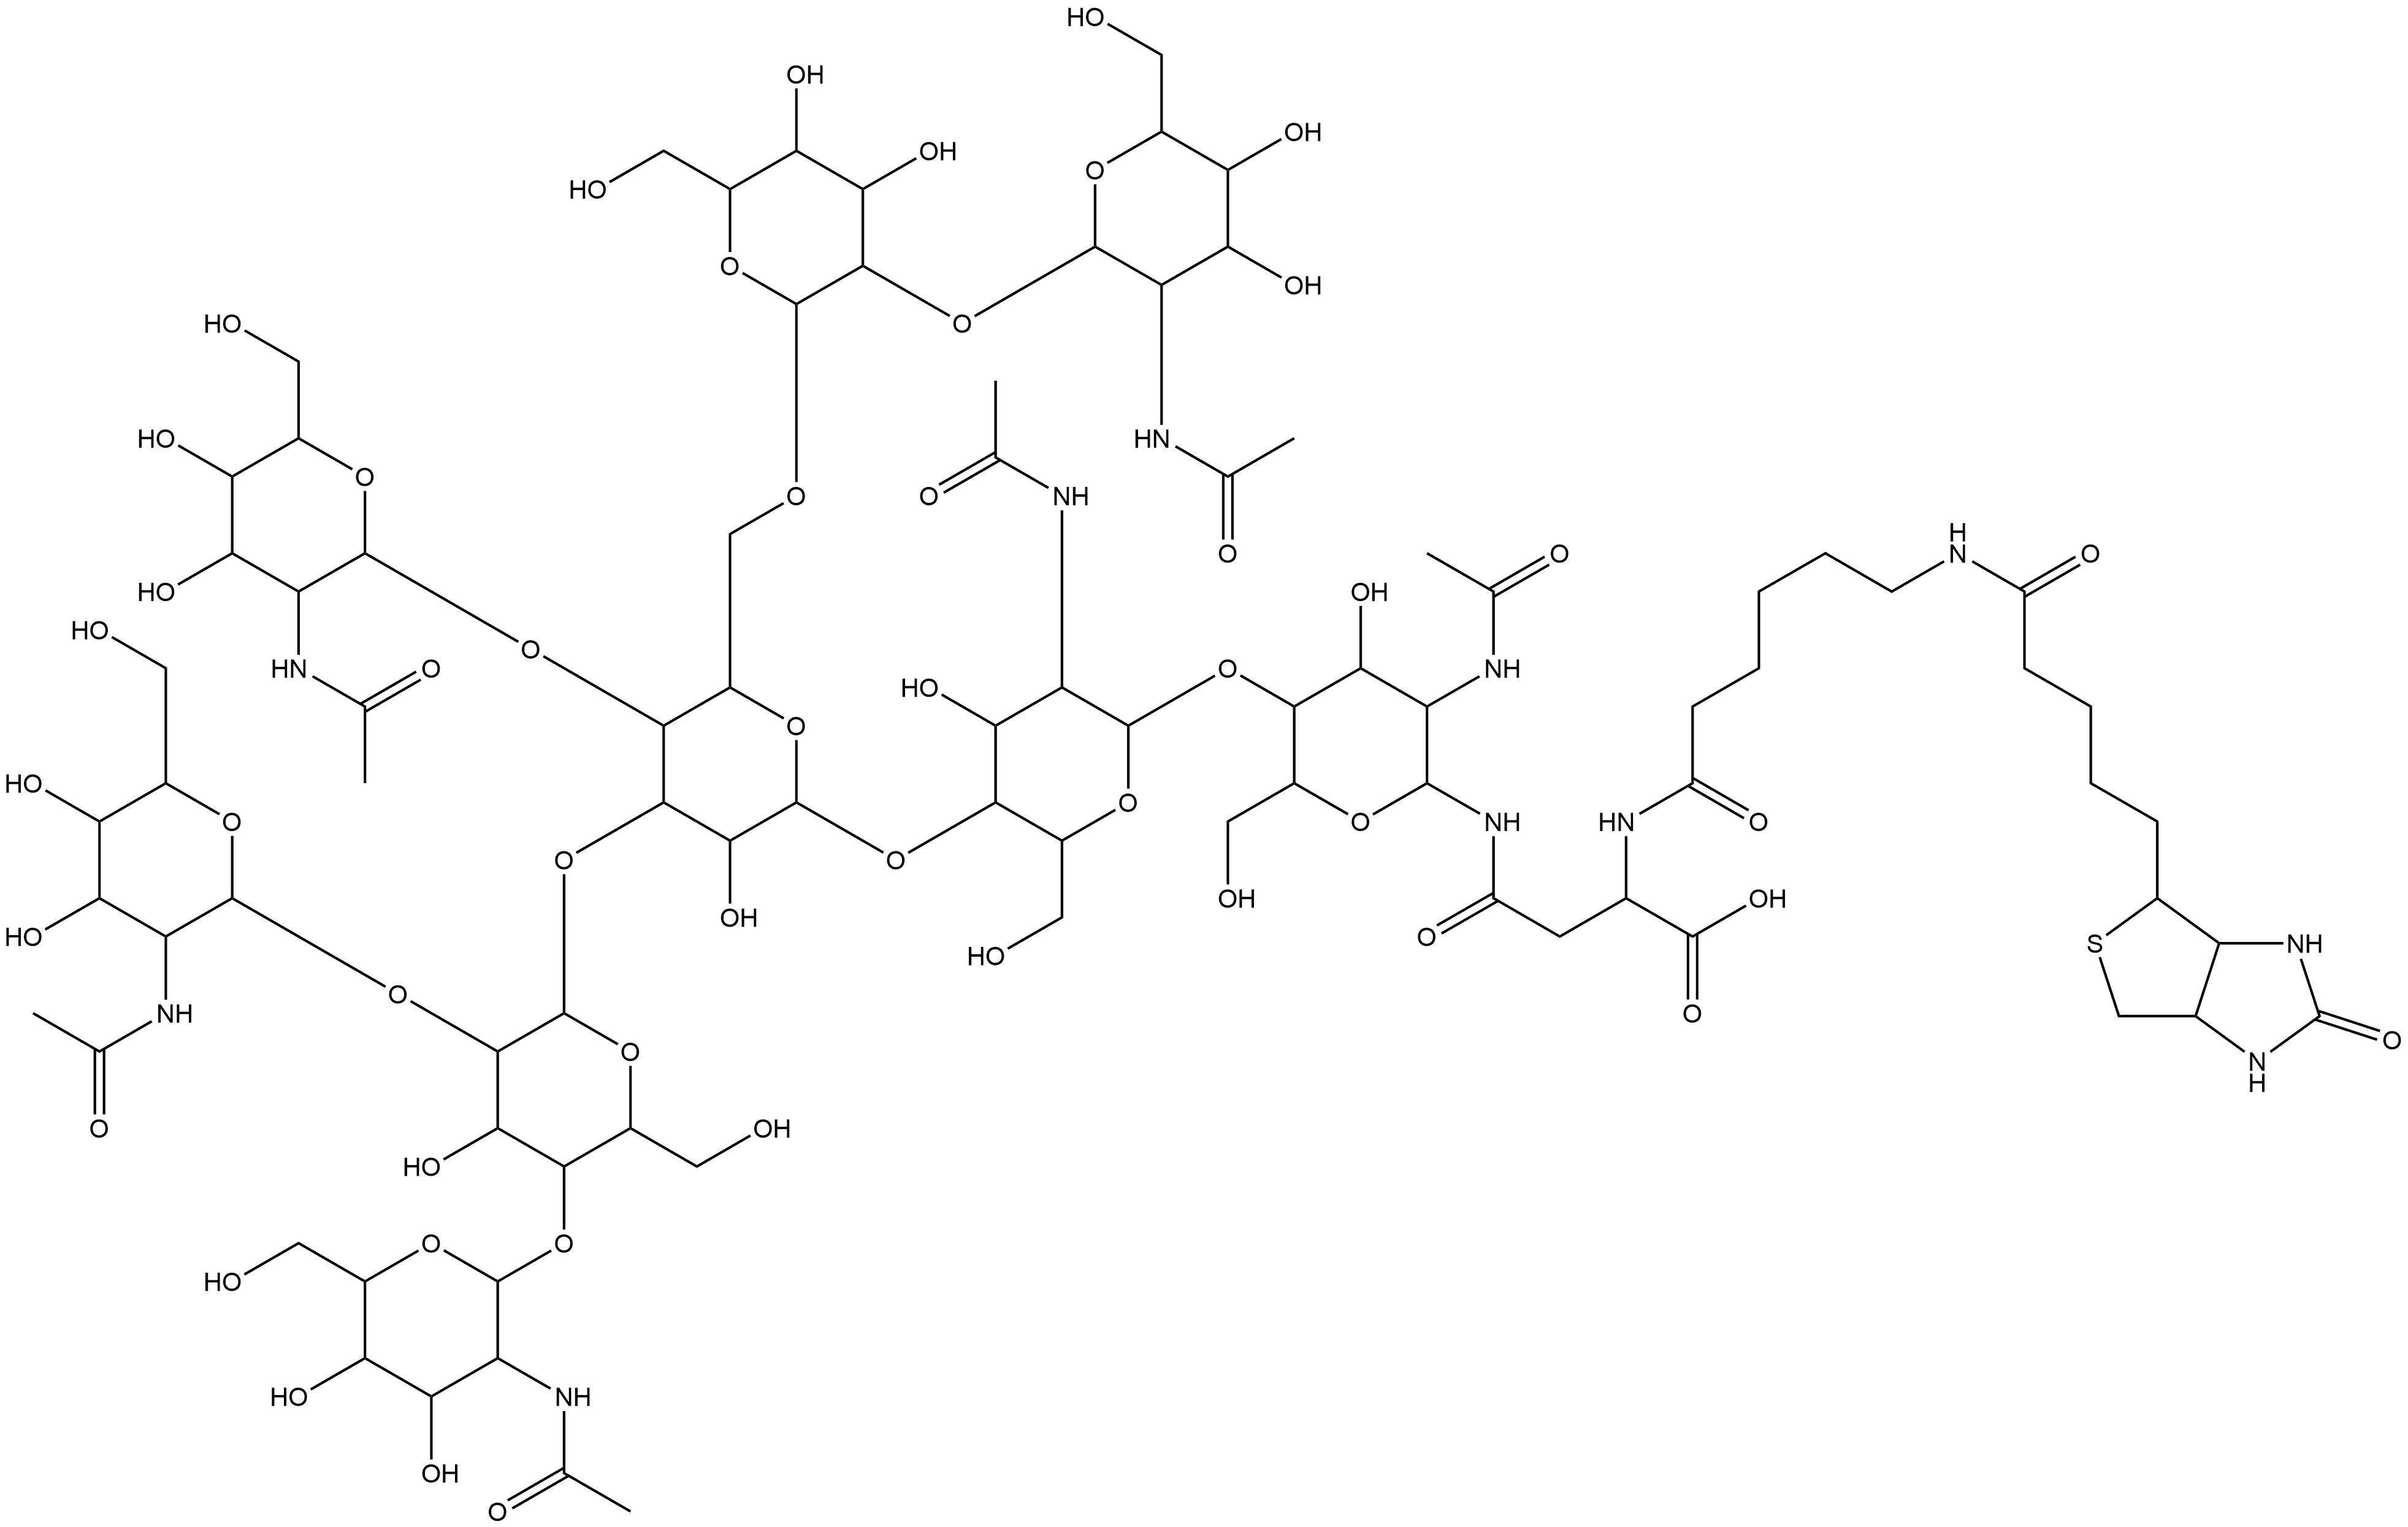 3aS-(3aα,4β,6aα)]-N-[O-2-(acetylamino)-2-deoxy-β-D-glucopyranosyl-(1→4)-O-[O-2-(acetylamino)-2-deoxy-β-D-glucopyranosyl-(1→2)-O-[2-(acetylamino)-2-deoxy-β-D-glucopyranosyl-(1→4)]-α-D-mannopyranosyl-(1→3)]-O-[O-2-(acetylamino)-2-deoxy-β-D-glucopyranosyl-(1→2)-α-D-mannopyranosyl-(1→6)]-O-β-D-mannopyranosyl-(1→4)-O-2-(acetylamino)-2-deoxy-β-D-glucopyranosyl-(1→4)-2-(acetylamino)-2-deoxy-β-D-glucopyranosyl]-N2-[6-[[5-(hexahydro-2-oxo-1H-thieno[3,4-d]imidazol-4-yl)-1-oxopentyl]amino]-1-oxohexyl]-L-As Structure